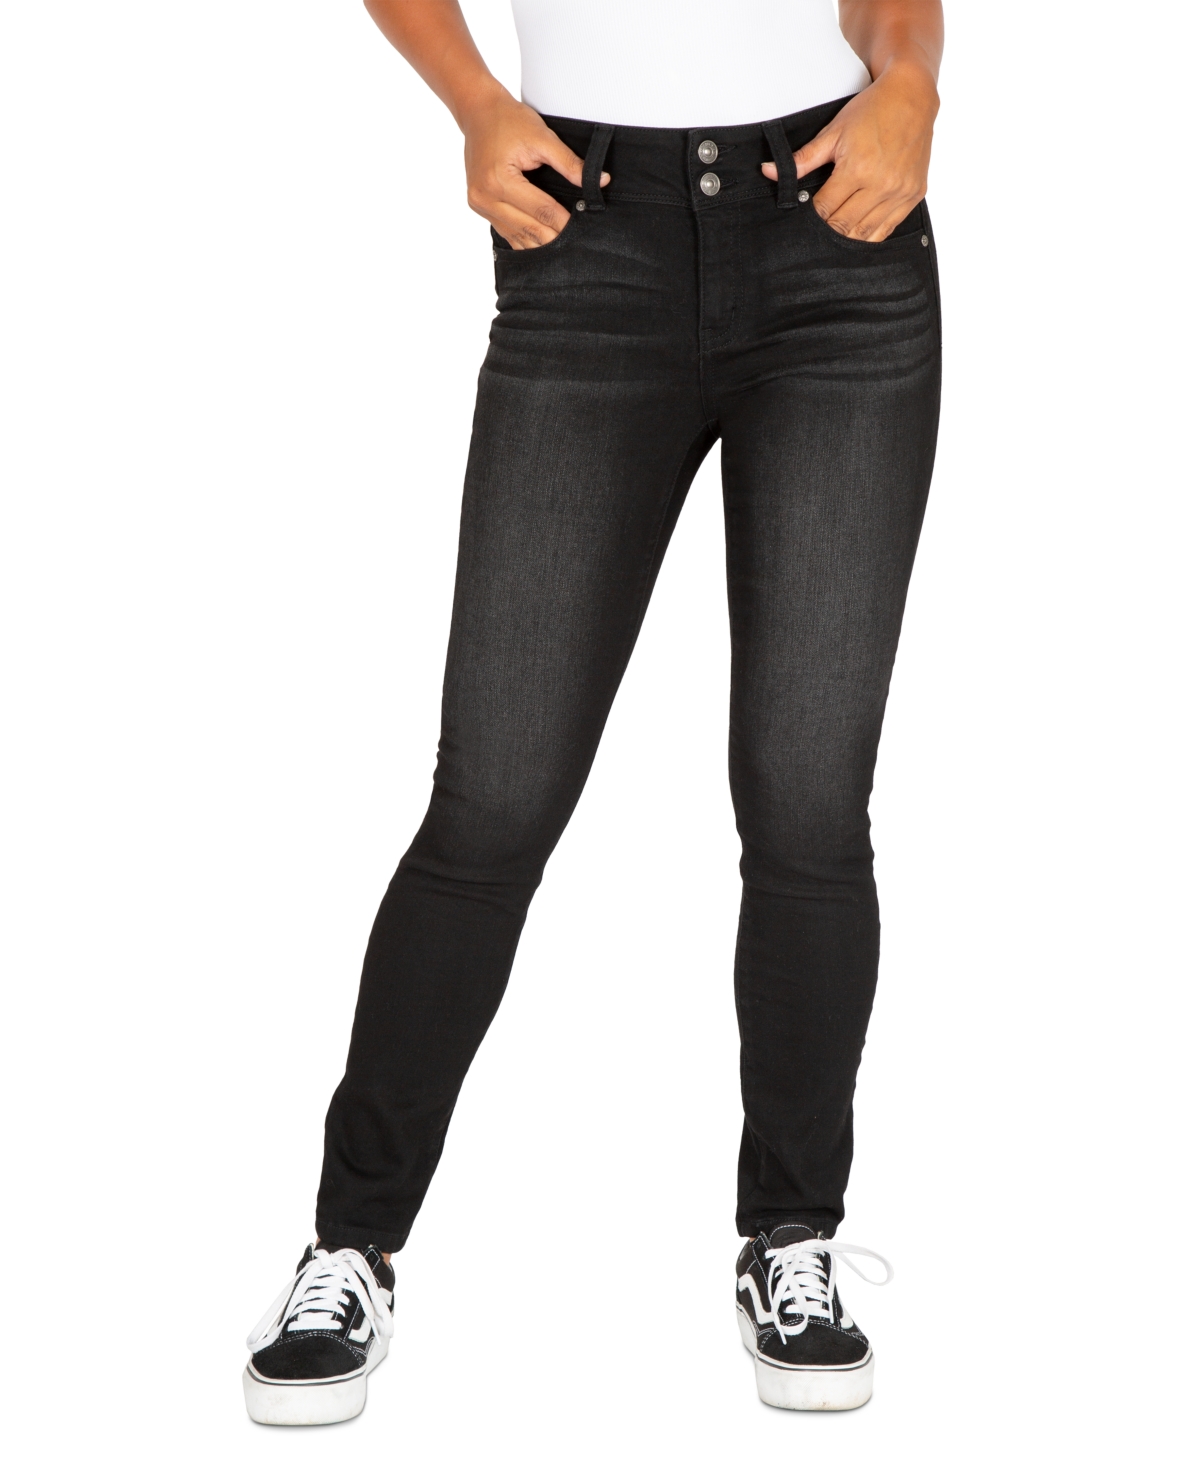 REWASH JUNIORS' MID-RISE BOOTY-SHAPING SKINNY JEANS